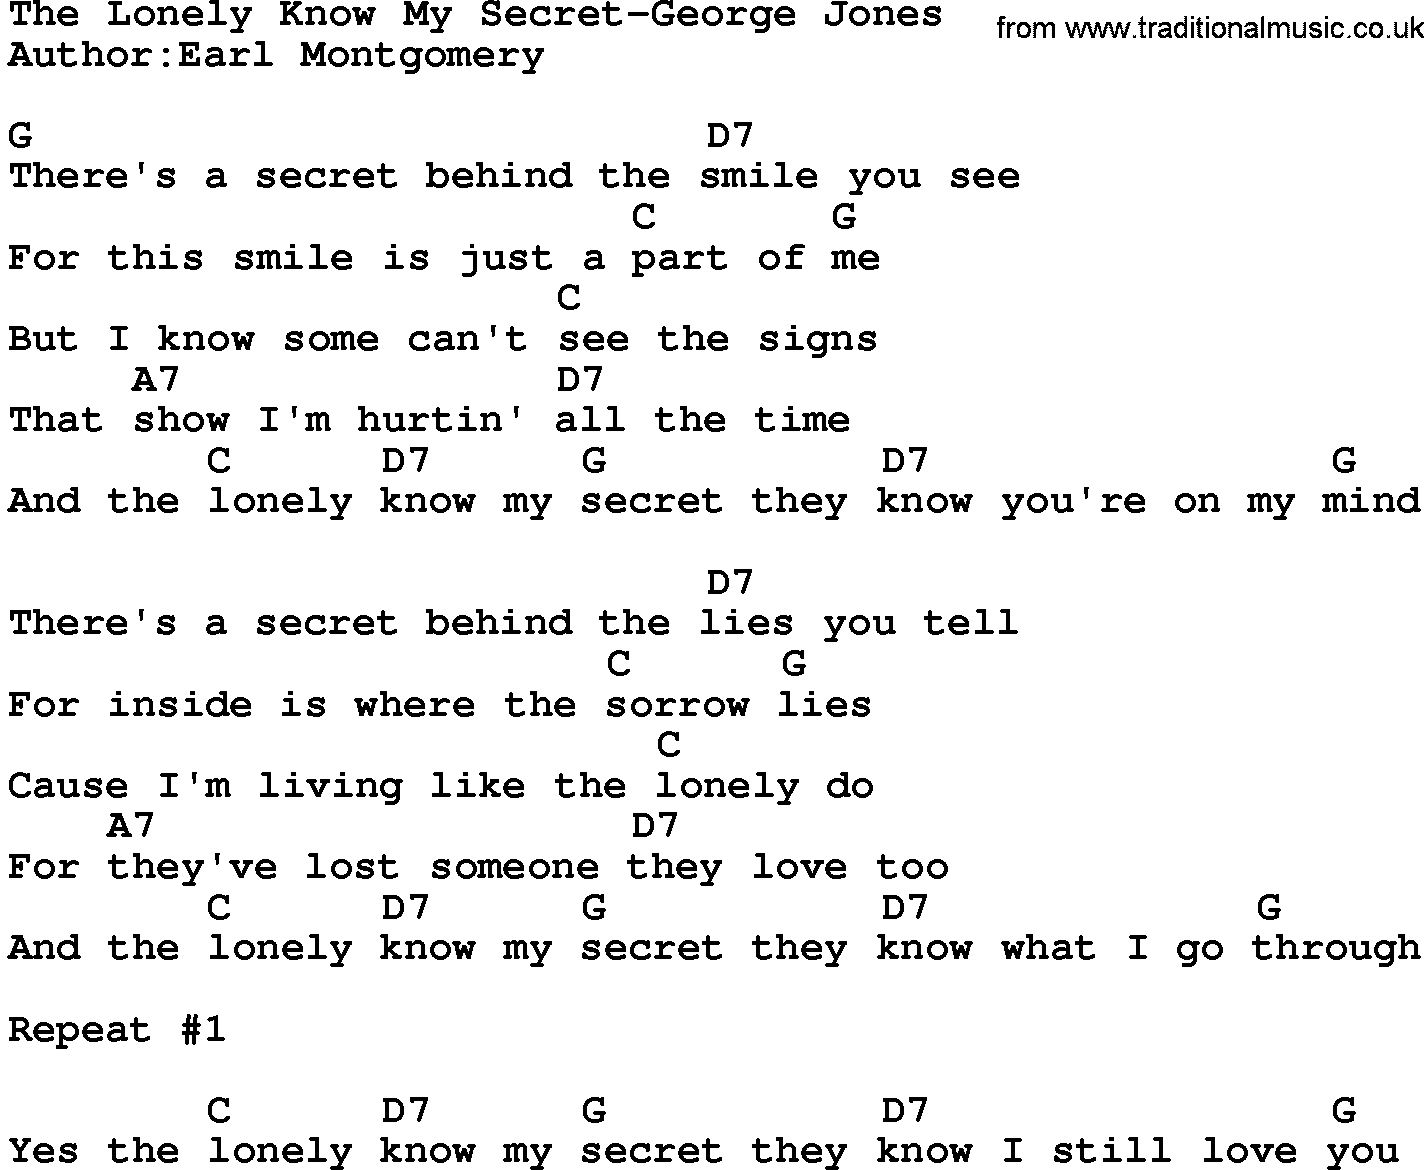 Country music song: The Lonely Know My Secret-George Jones lyrics and chords